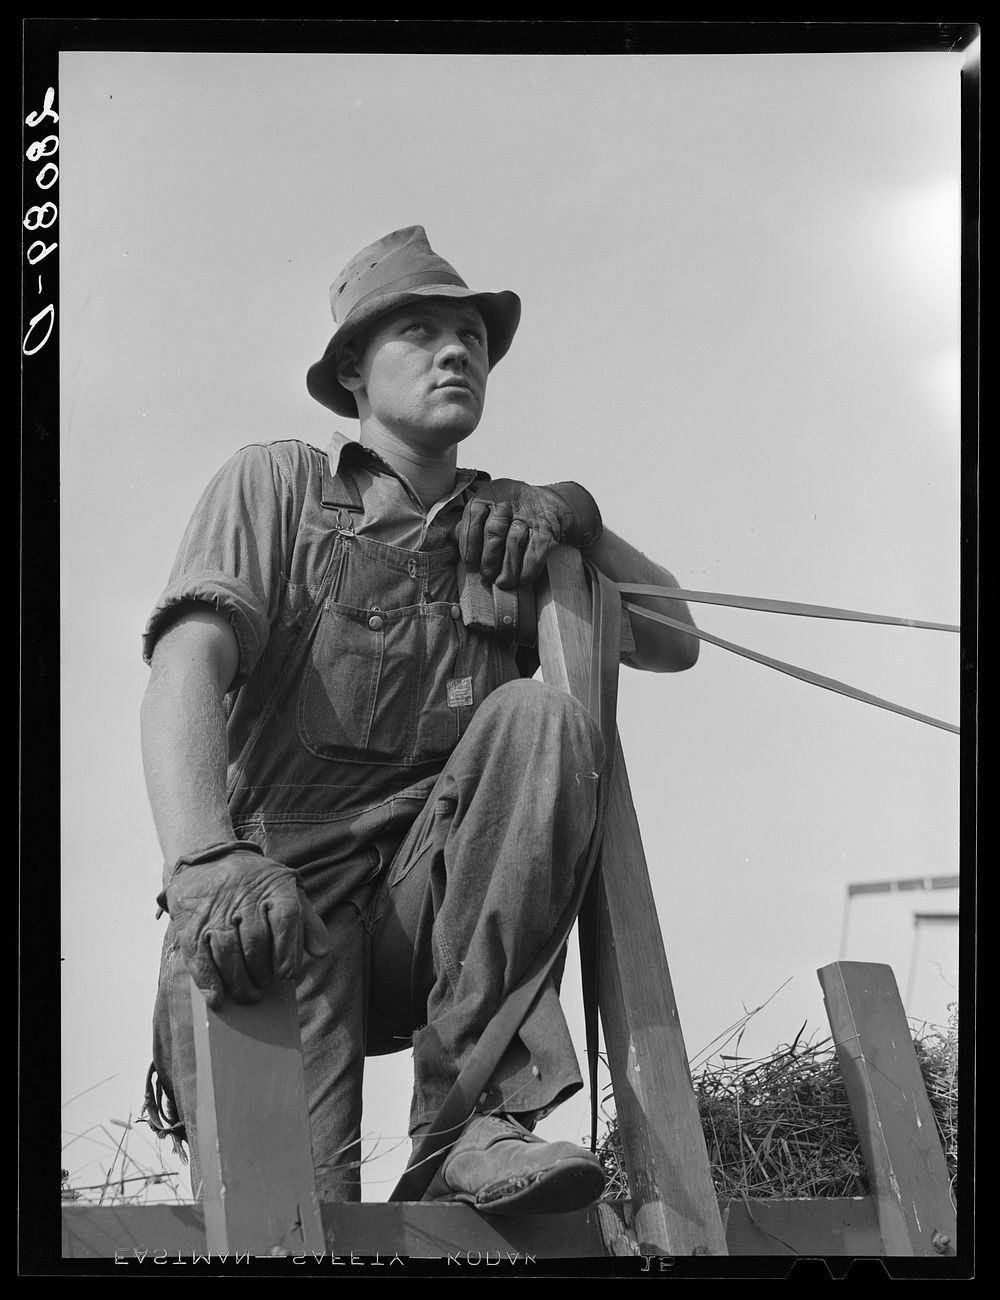 Hired hand. Kimberley Farm, Jasper County, Iowa. Sourced from the Library of Congress.